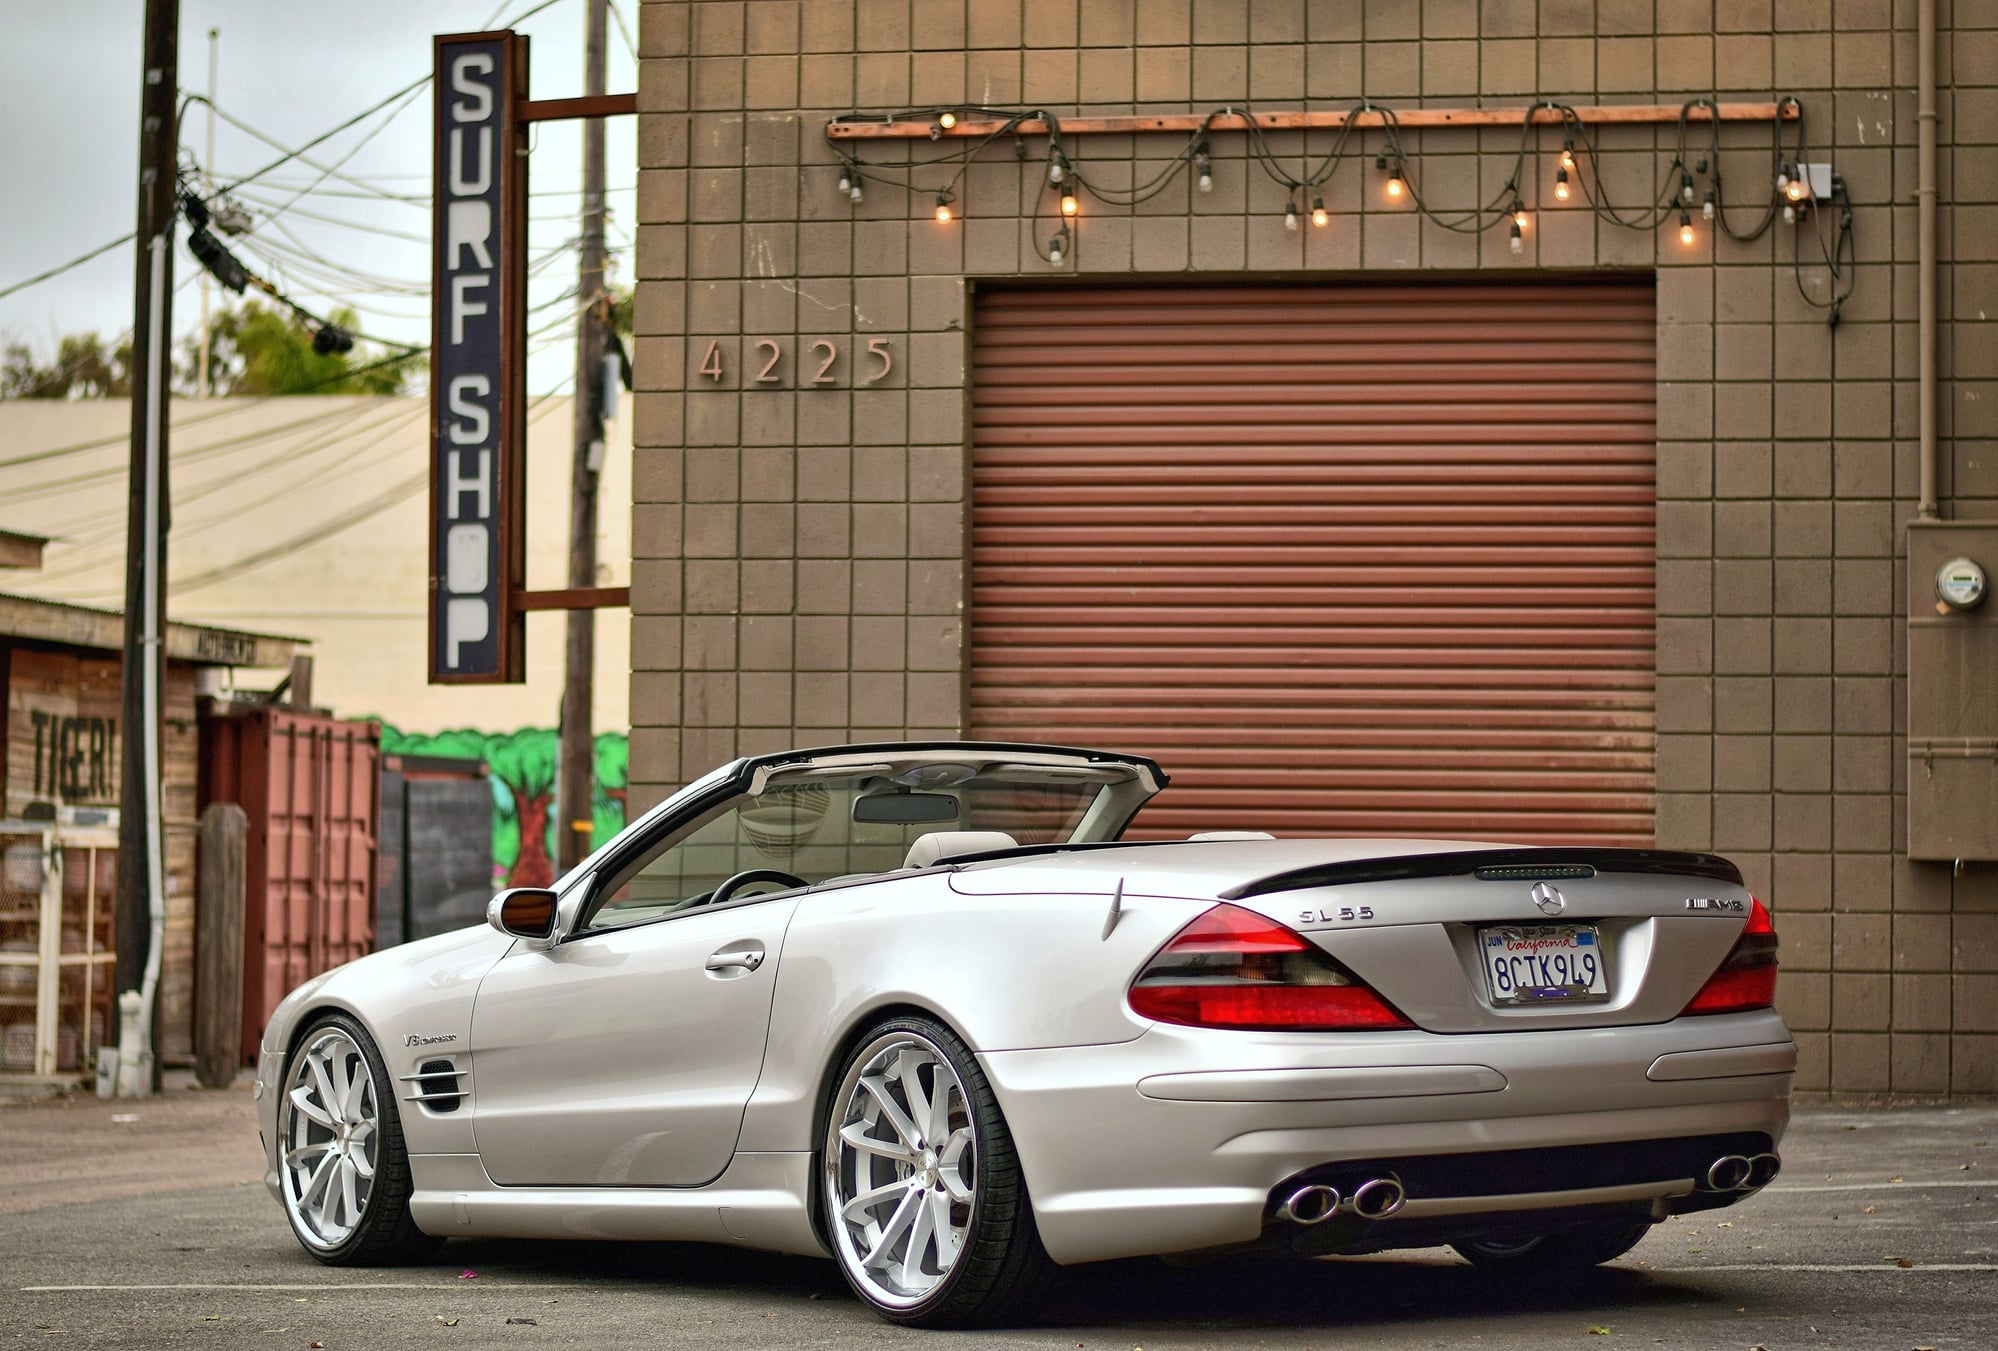 2004 Mercedes-Benz SL55 AMG - 2004 Mercedes SL55 AMG // Low Miles / Upgrades / Extremely Clean / Fully Maintained - Used - VIN WDBSK74F04F077155 - 84,500 Miles - 8 cyl - 2WD - Automatic - Convertible - Silver - Lemon Grove, CA 91945, United States